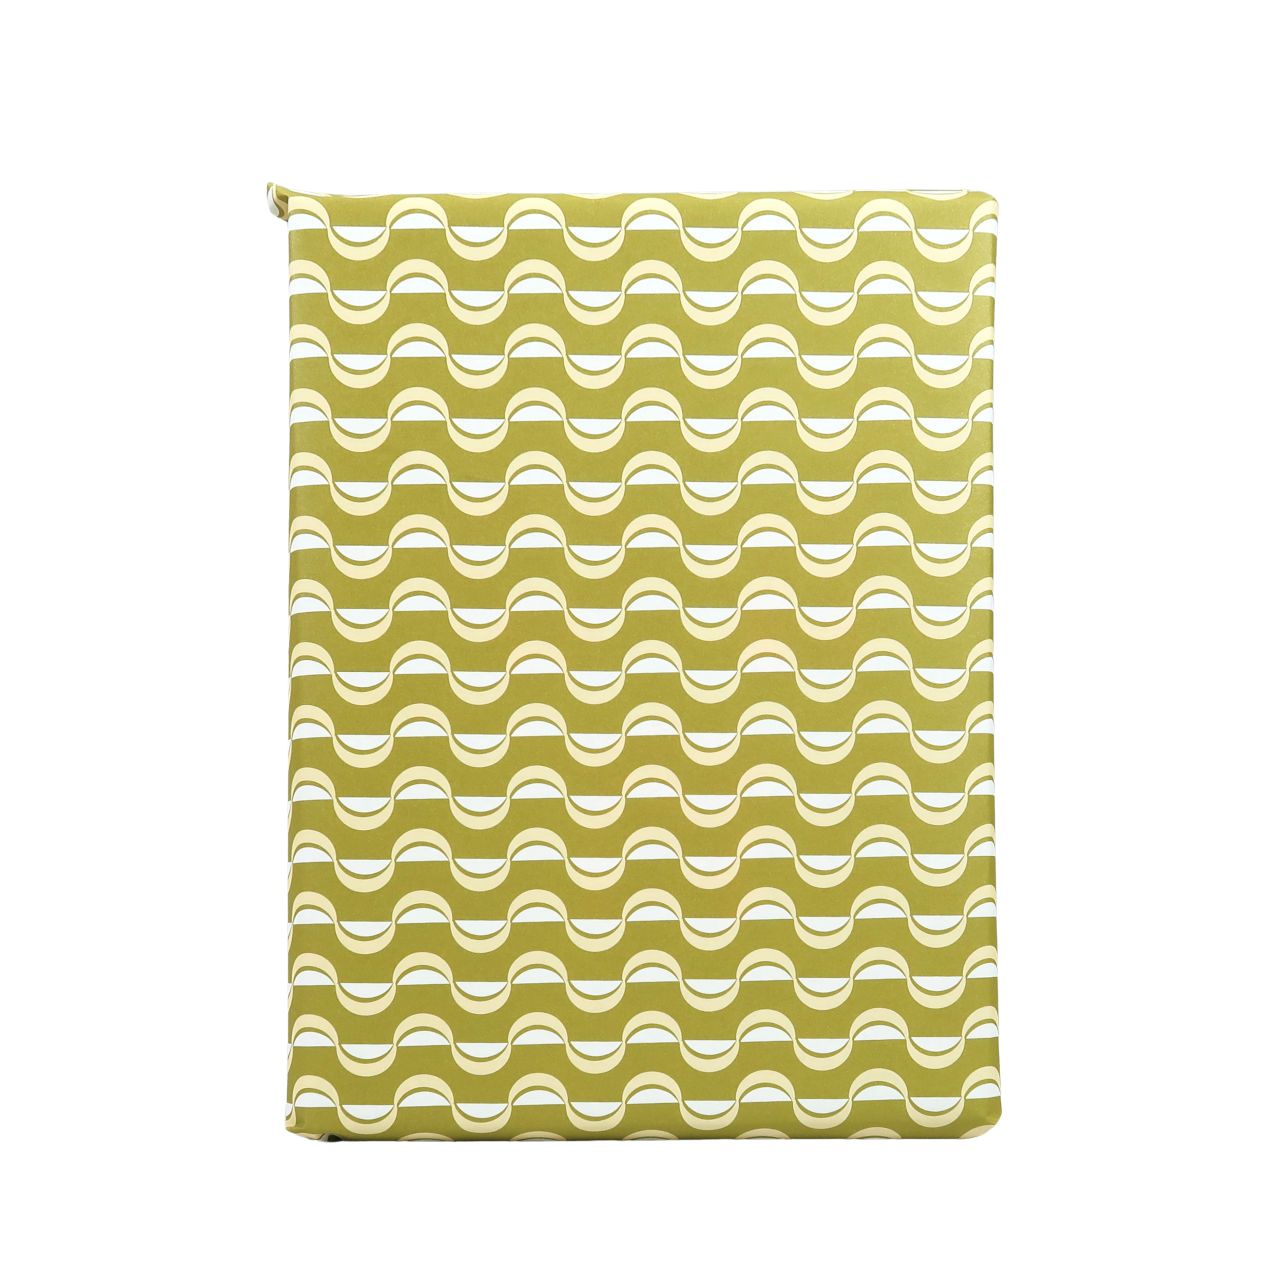 Ola 10 Sheets of Patterned Paper - Wave Chartreuse/Salmon